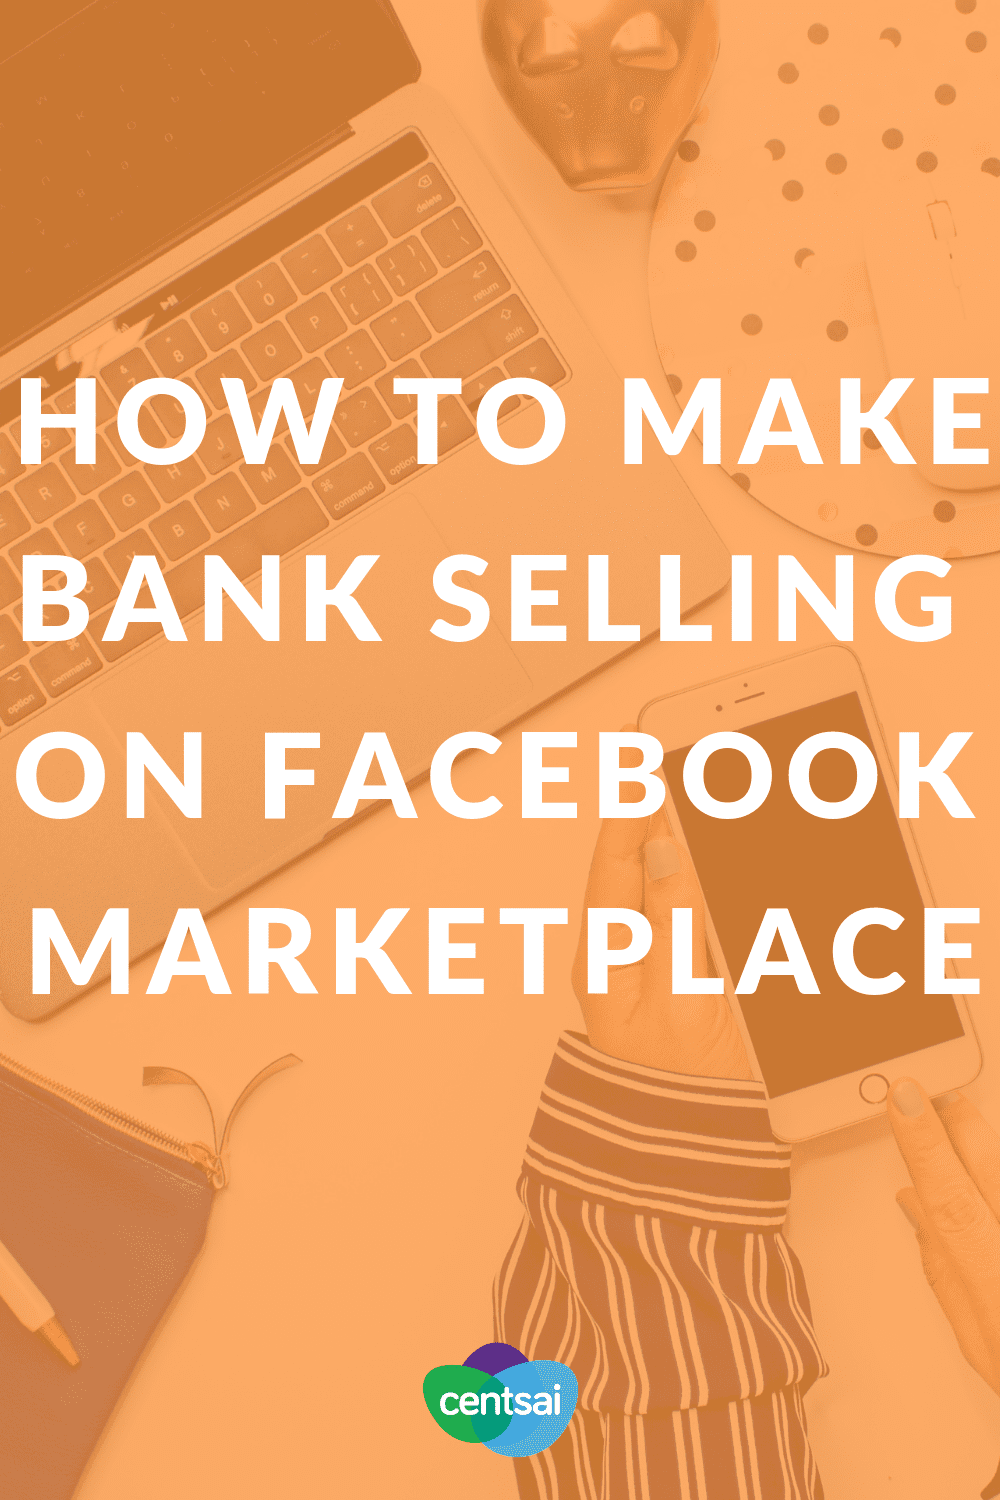 How to Make Bank Selling on Facebook Marketplace. Got tons of clutter around the house? Turn your junk into money! Check out these six easy tips for selling it on Facebook Marketplace. #sidehustle #blogs #personalfinance #makemoney #facebook #extramoney #sidehustle #passiveincome